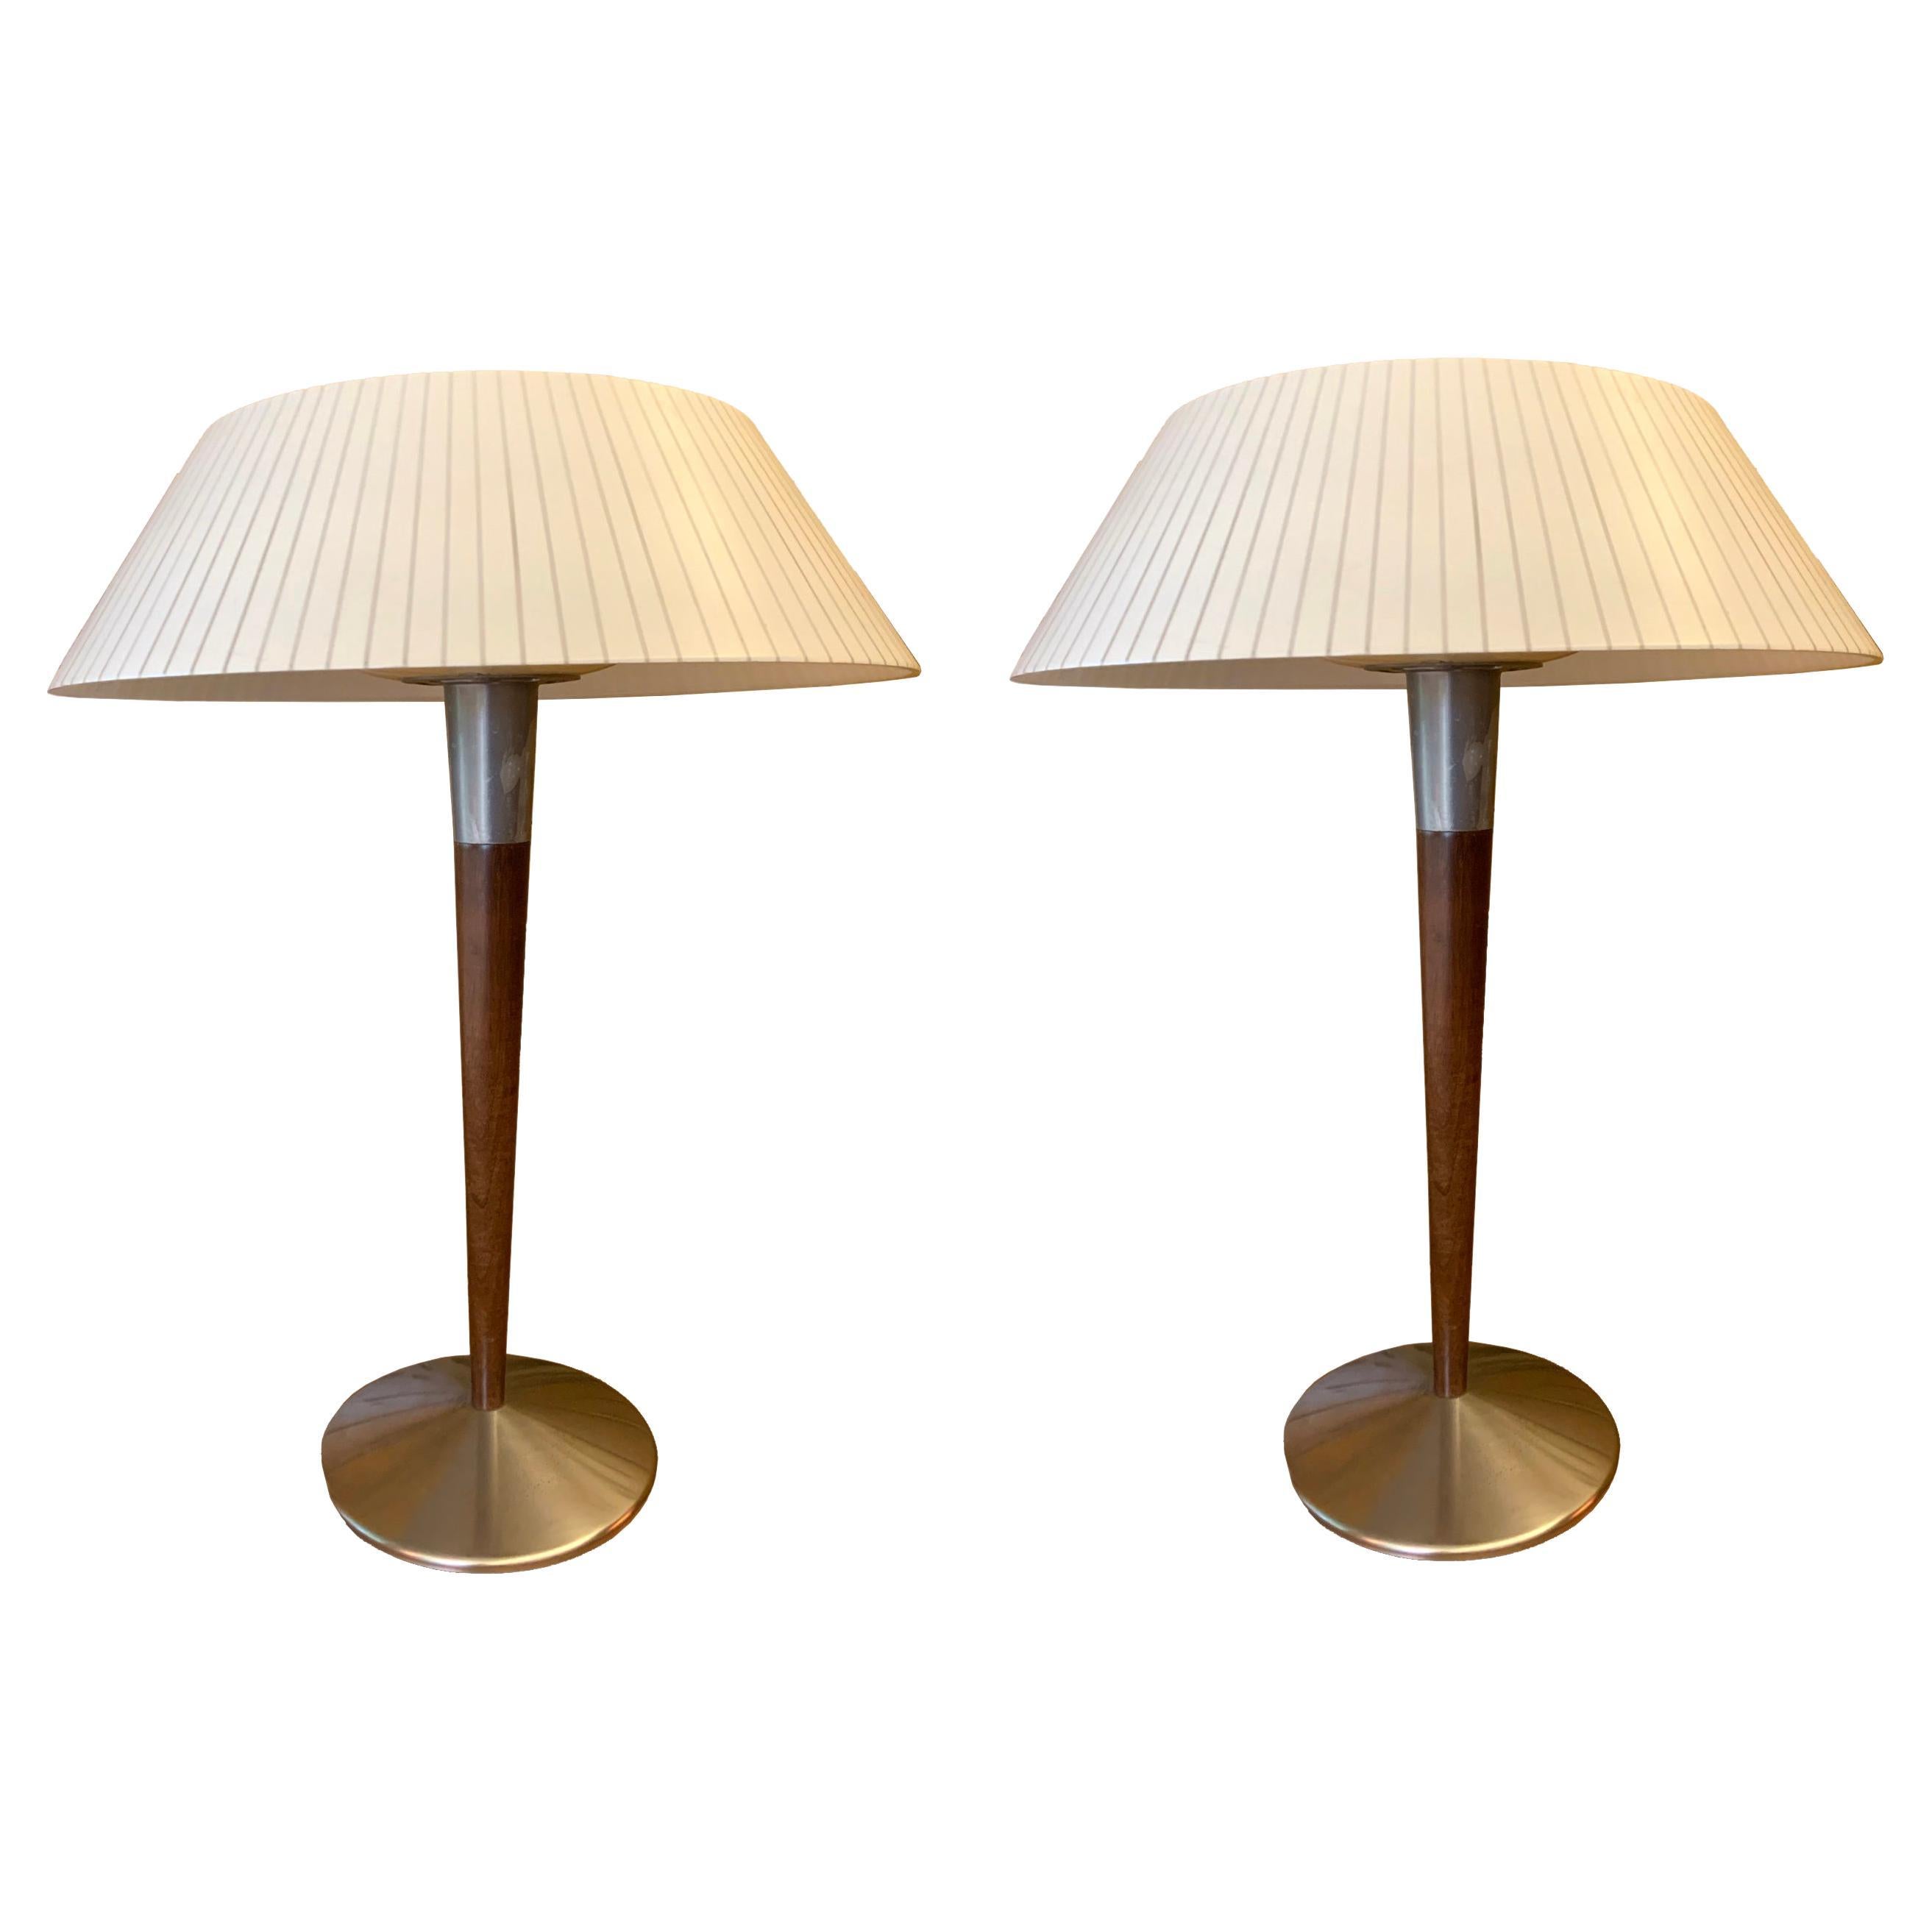 Mid Century Modern Pair of Gerald Thurston for Laurel Table Lamps 1960s